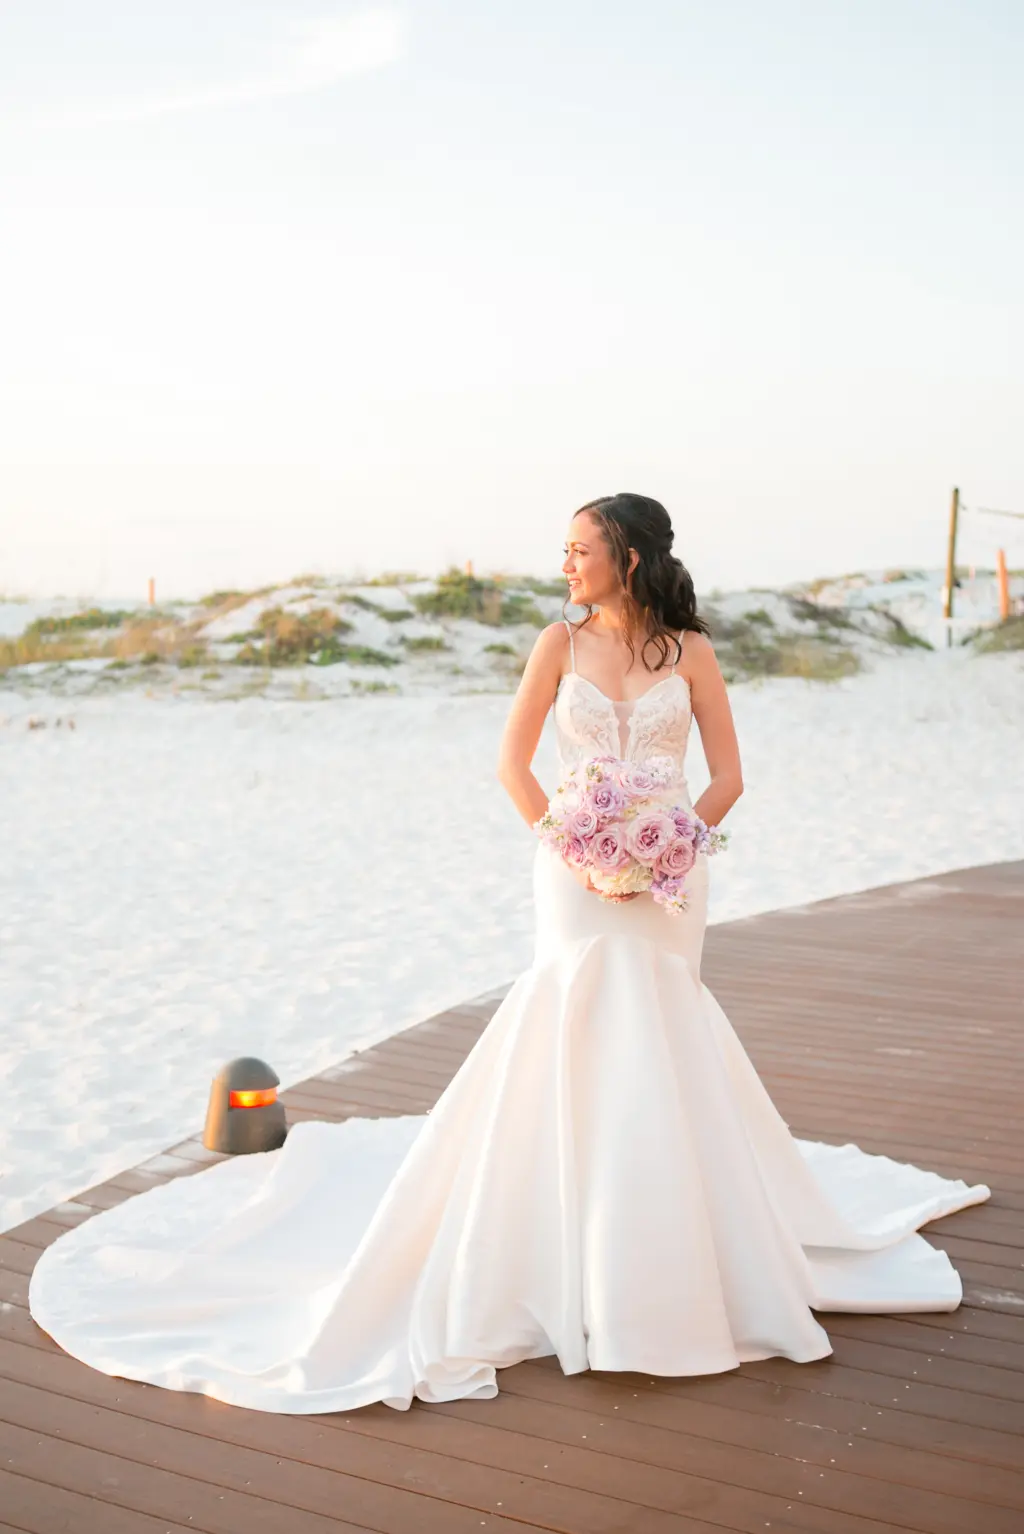 Timeless Bridal Hair and Makeup Ideas | Sunset Wedding Portrait | White Removable Spaghetti Strap Lace and Satin Mermaid Wedding Dress with Cathedral Train Inspiration | Tampa Bay Boutique Truly Forever Bridal | Clearwater Photographer Carrie Wildes Photography | Venue Sandpearl Resort Hotel